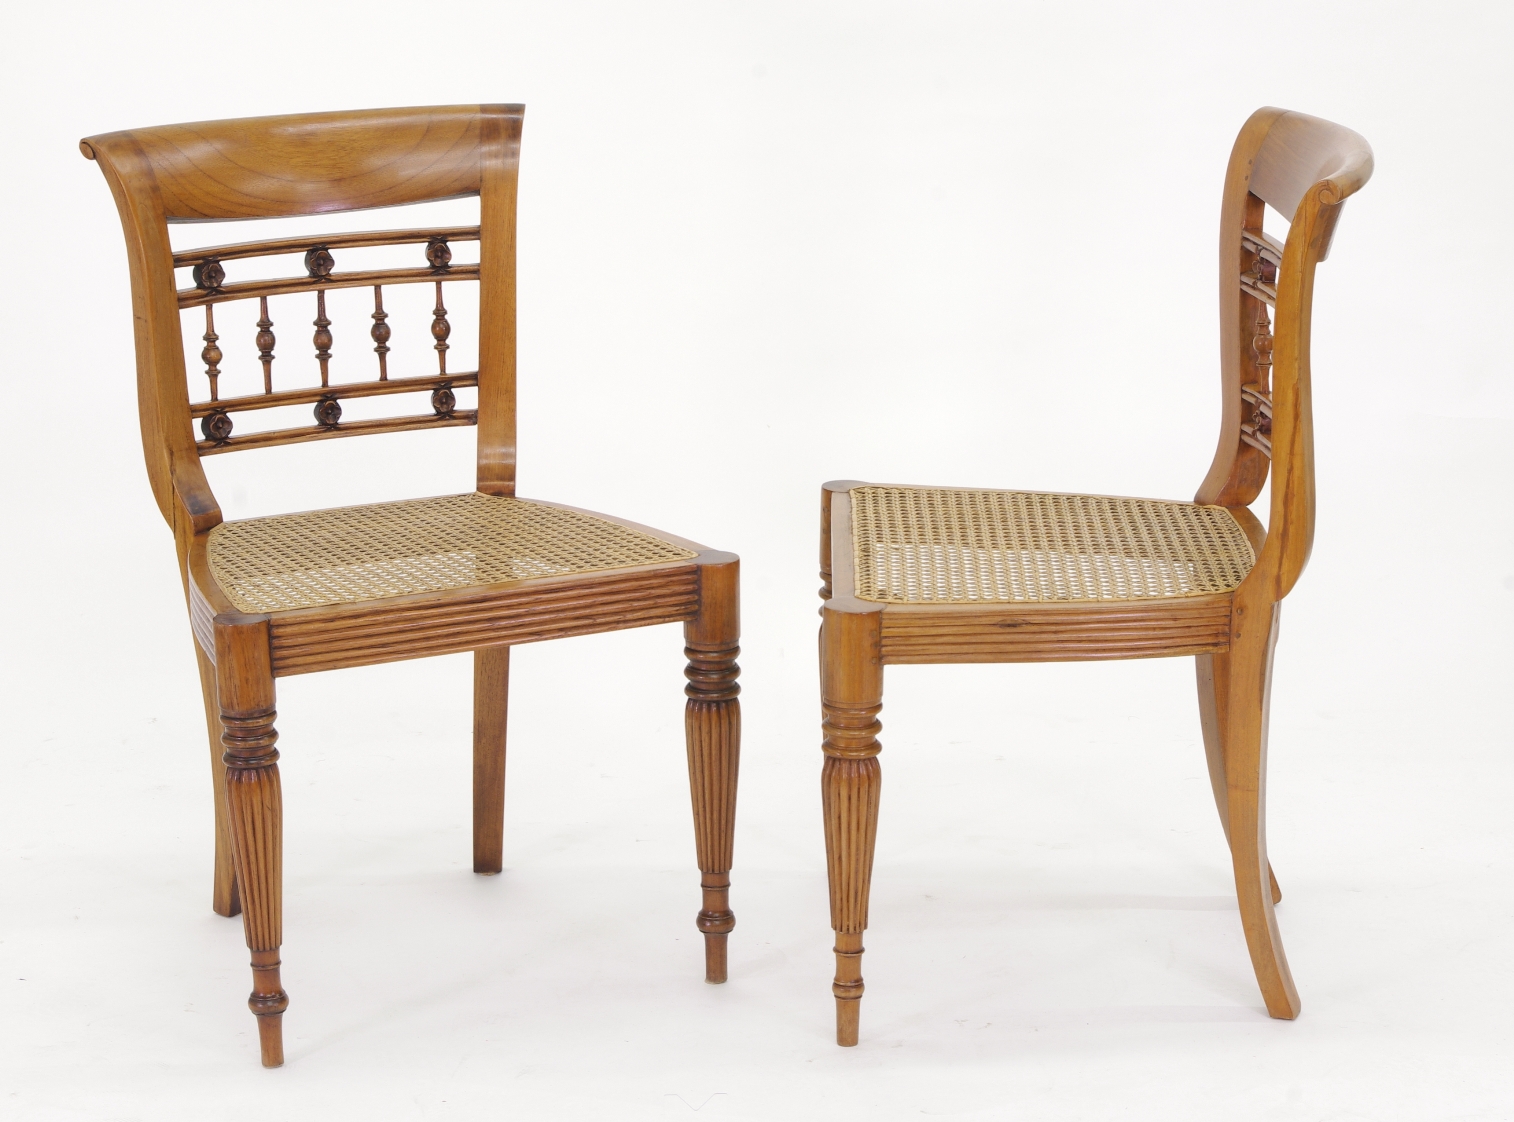 Set of Six British Colonial Dining Chairs, c. 1830